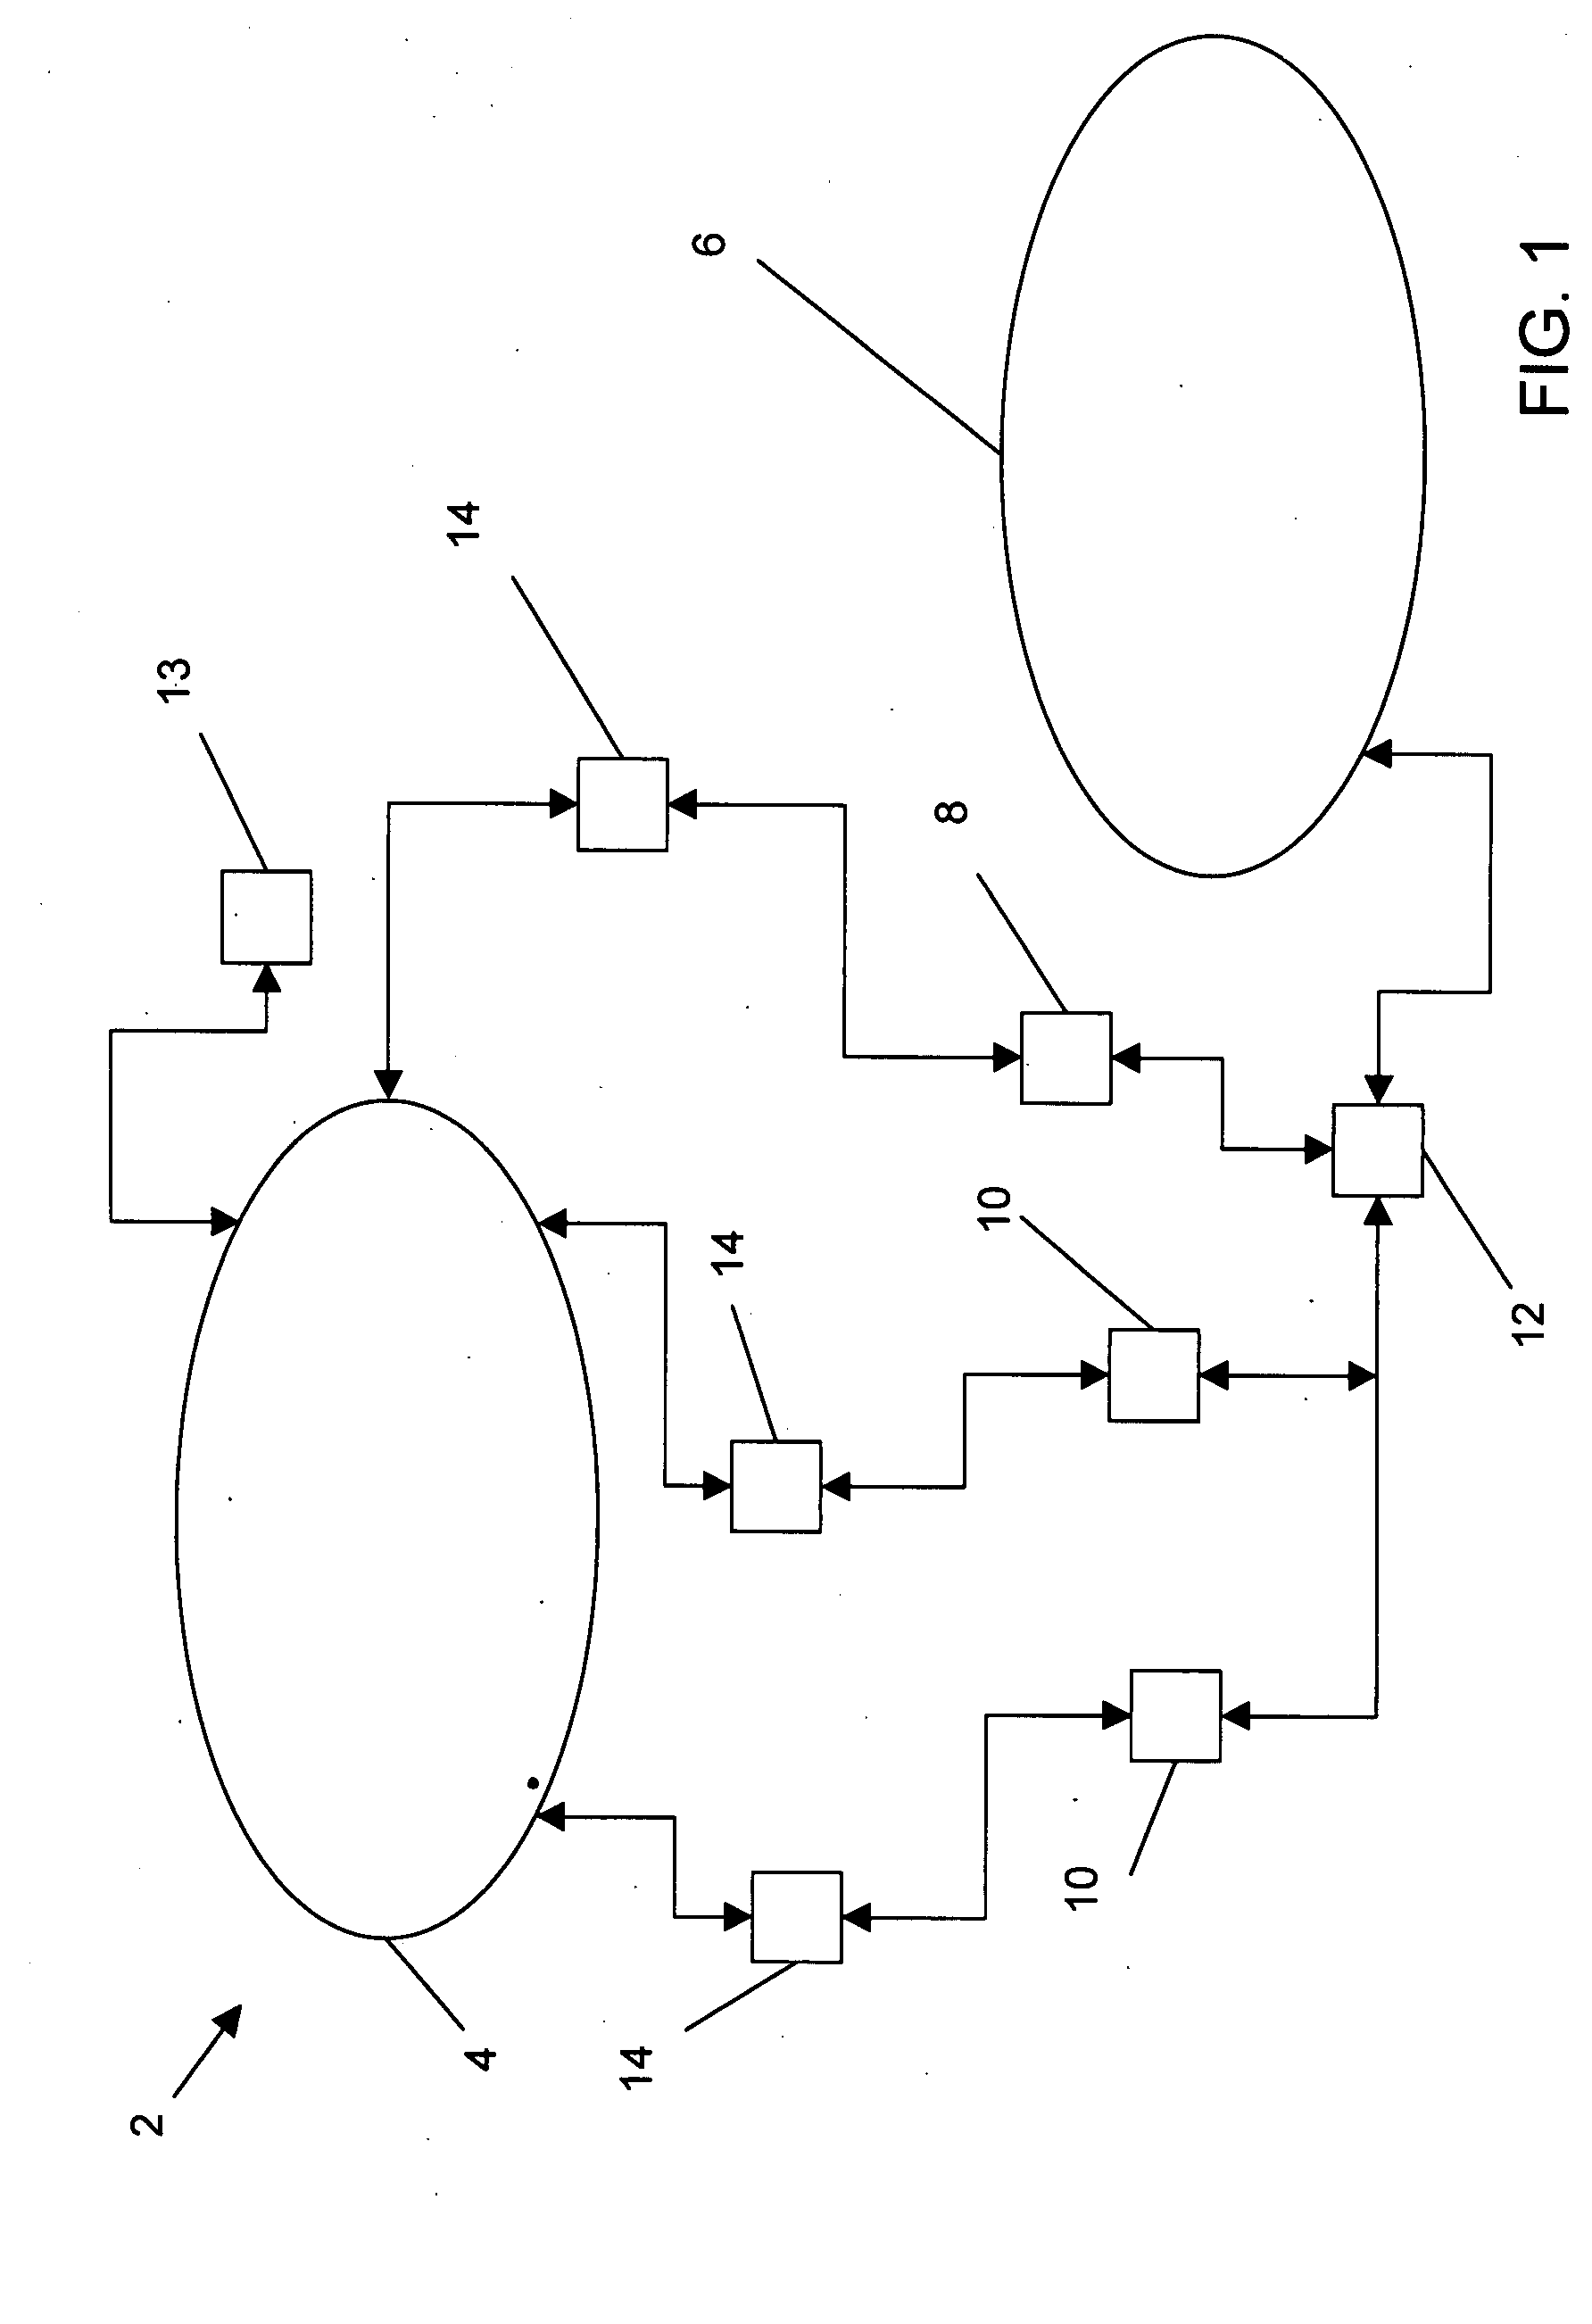 Method, system and computer-readable media for reducing undesired intrusion alarms in electronic communications systems and networks